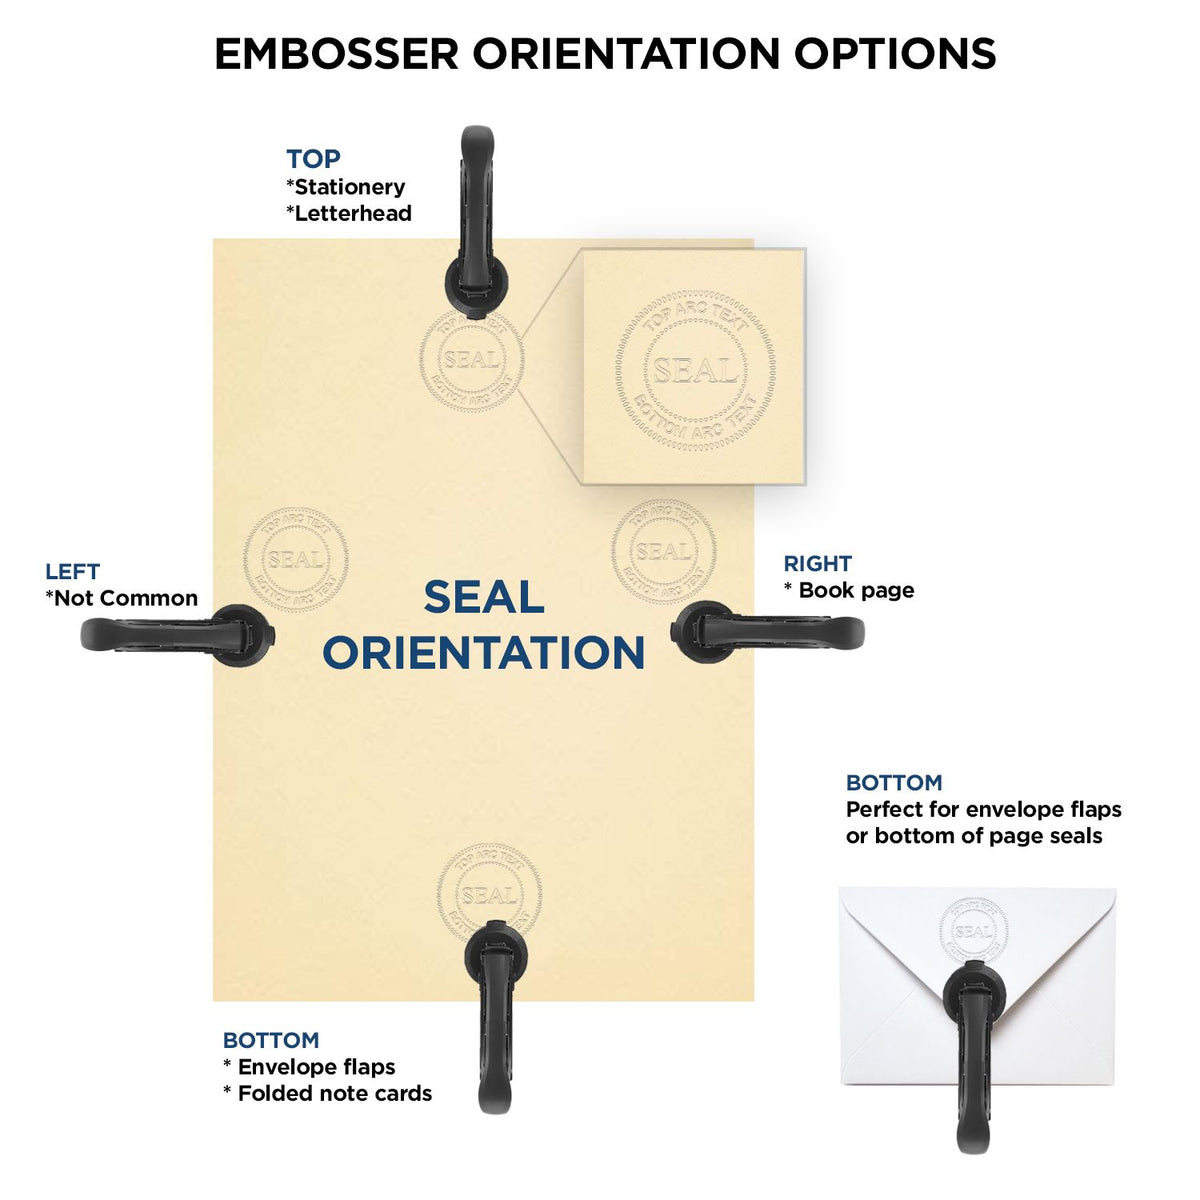 An infographic for the Soft California Professional Engineer Seal showing embosser orientation, this is showing examples of a top, bottom, right and left insert.